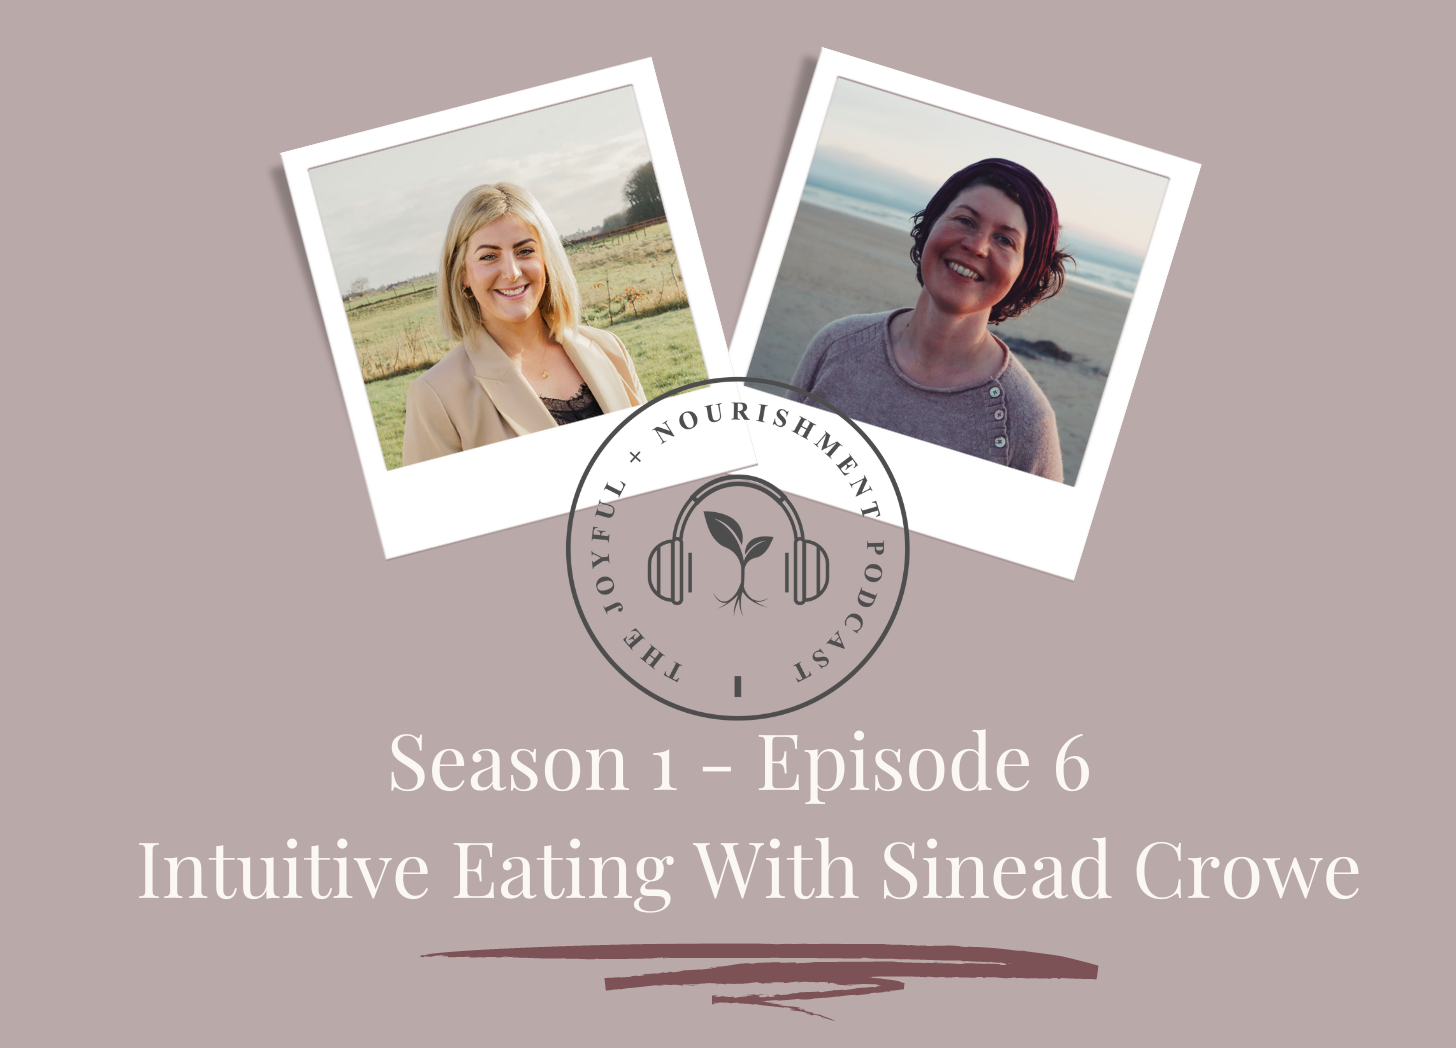 SE1-Ep6: Intuitive Eating and learning to become an intuitive eater with Sinead Crowe